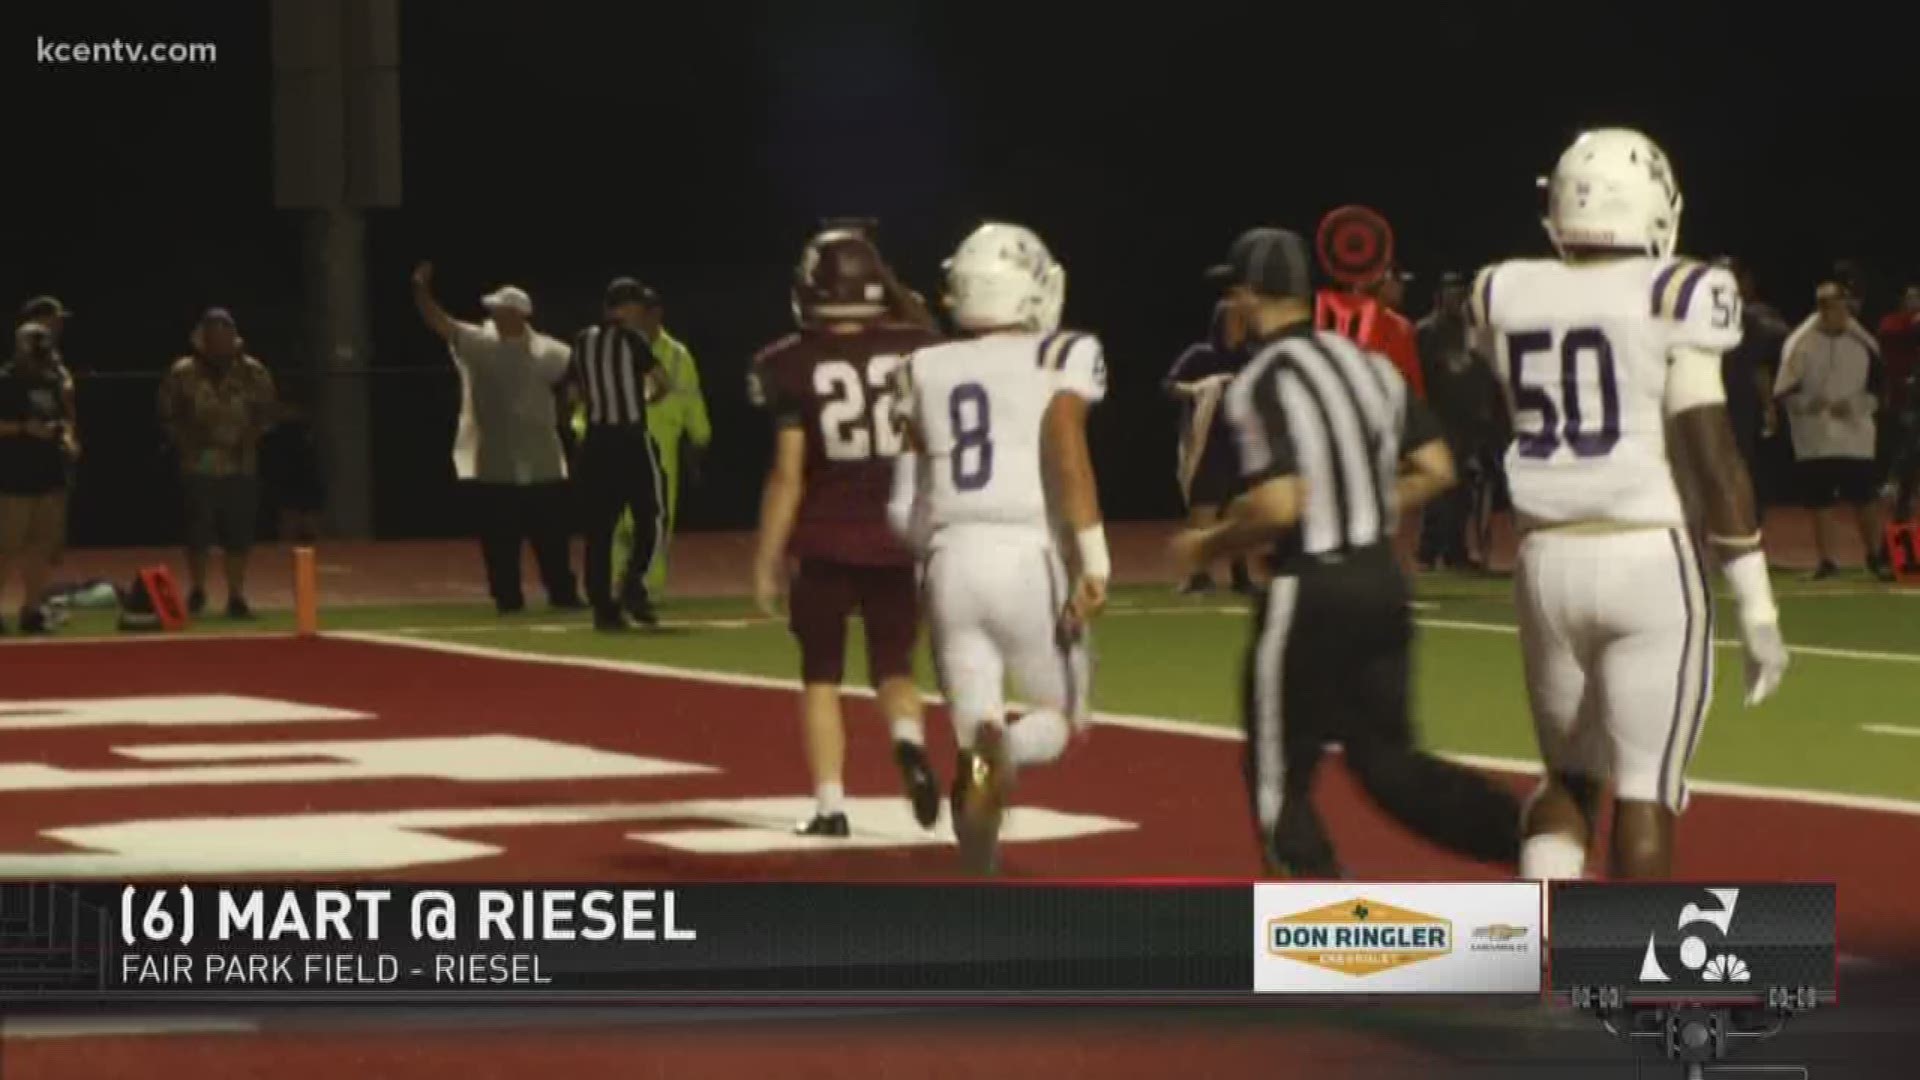 Mart bounced back from a tough loss last week with a 52-21 win over Riesel.